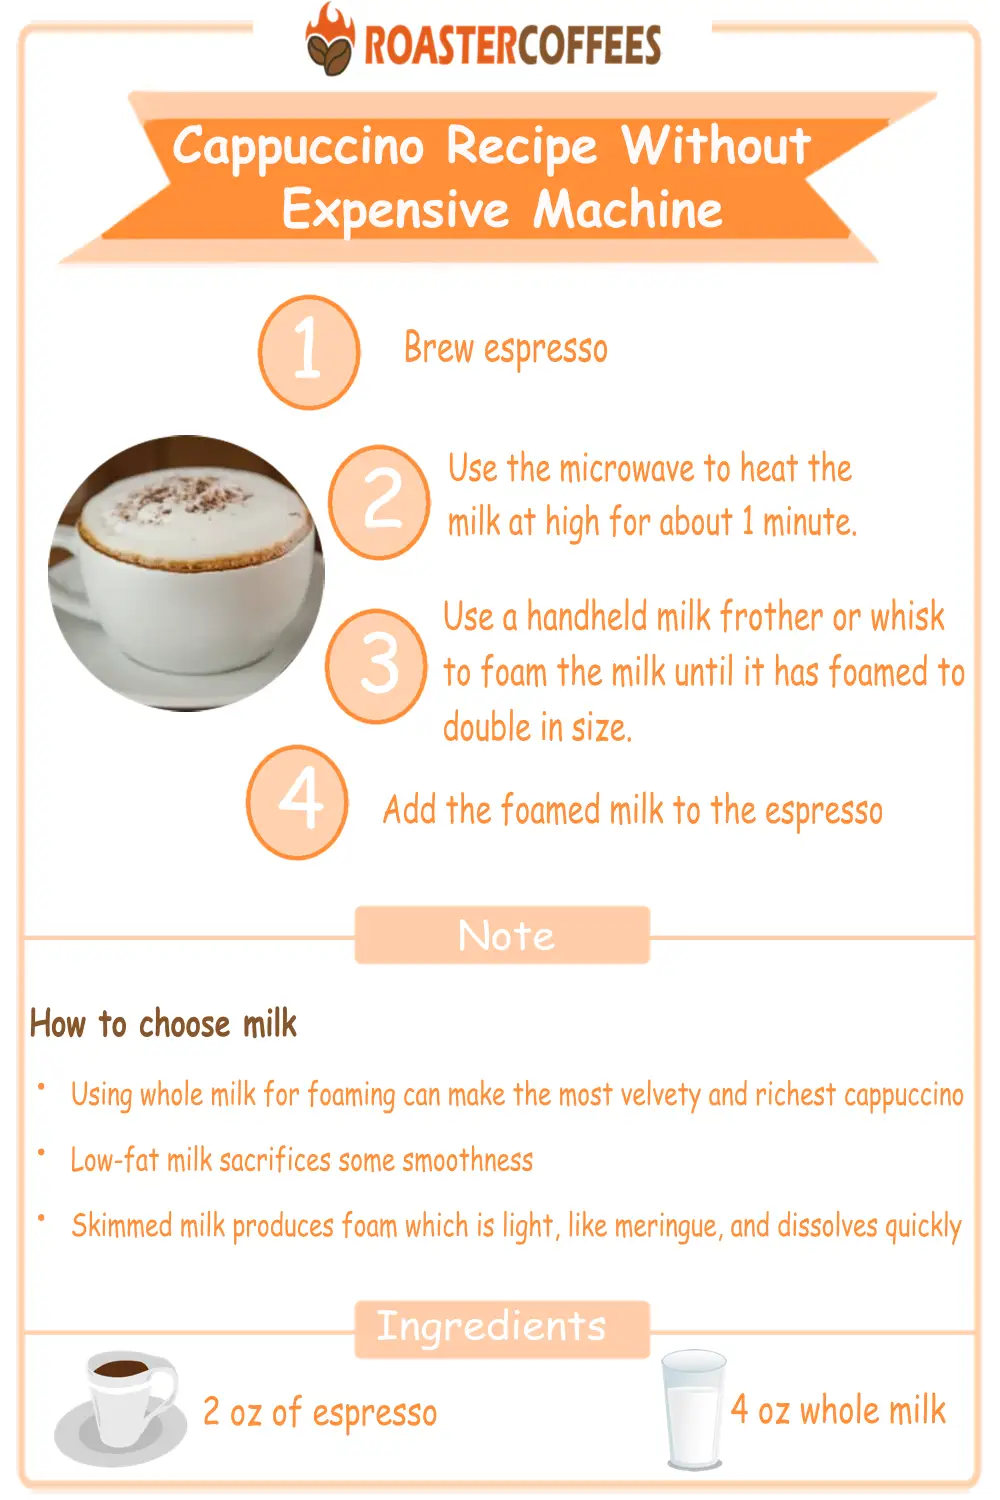 Step By Step: How To Make Cappuccino Without Expensive Machine (Webp image)